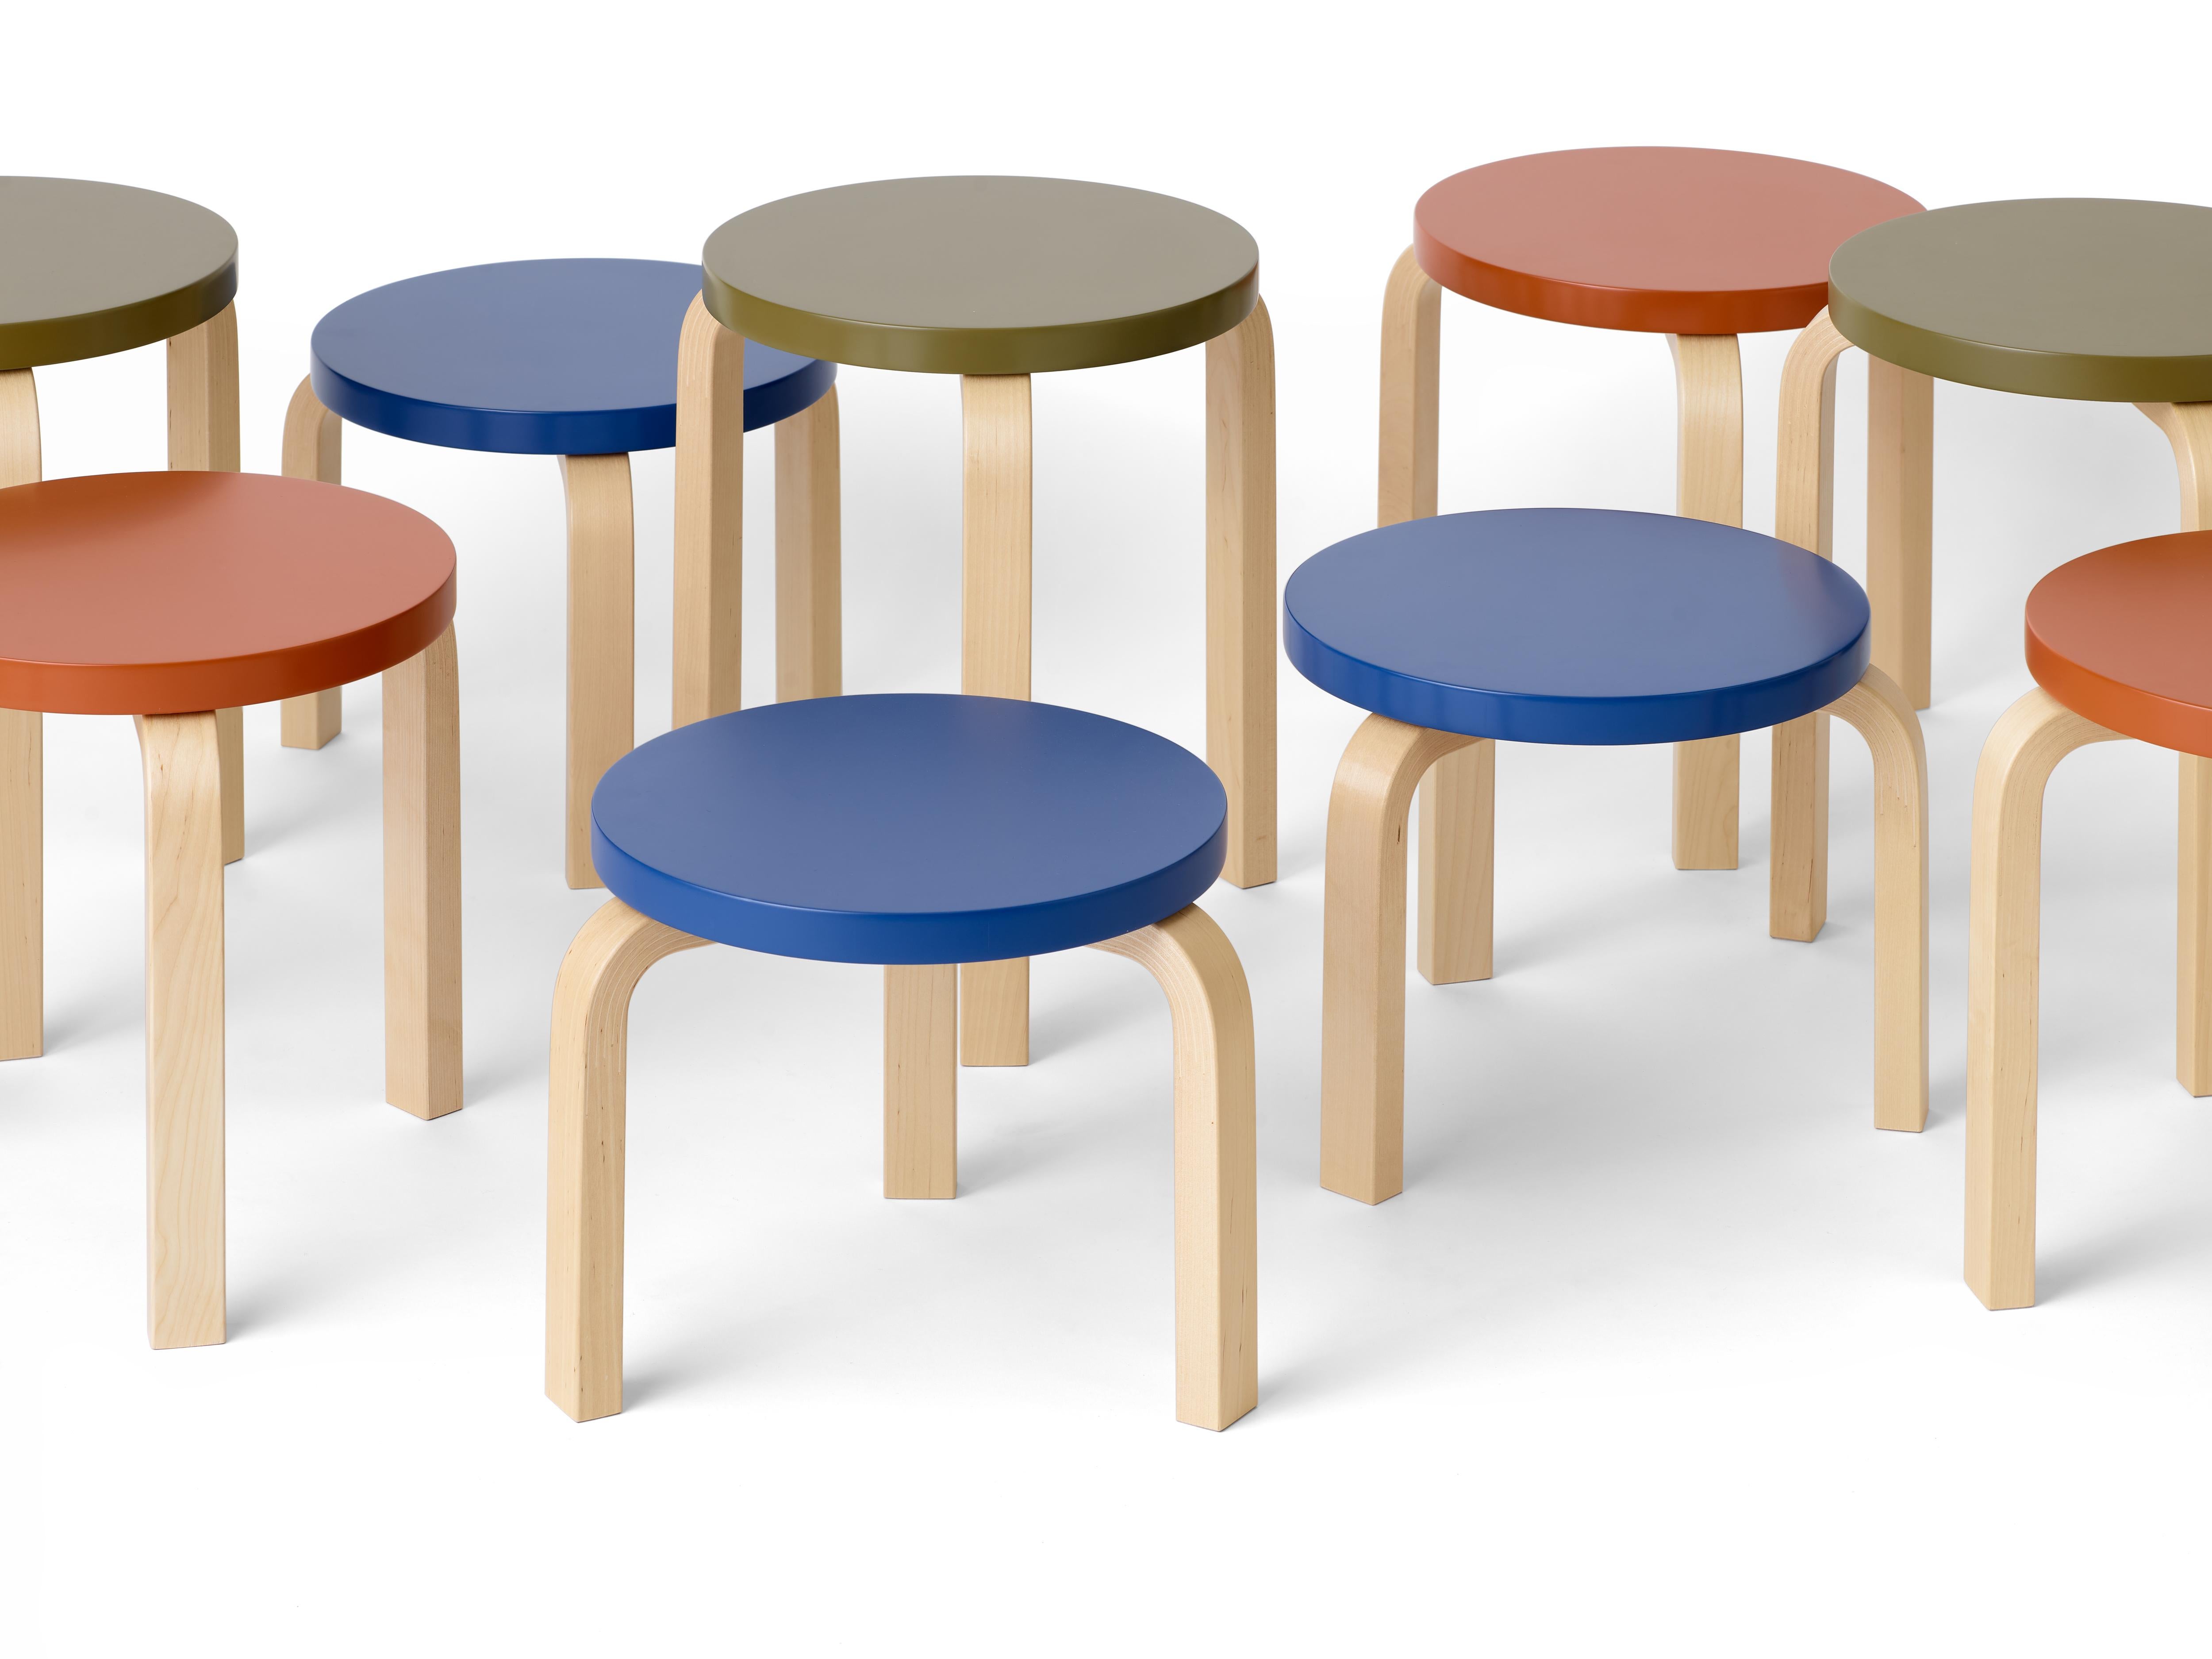 Limited Edition Low Stool 60 in Moonstone by Artek and Heath (Birke)